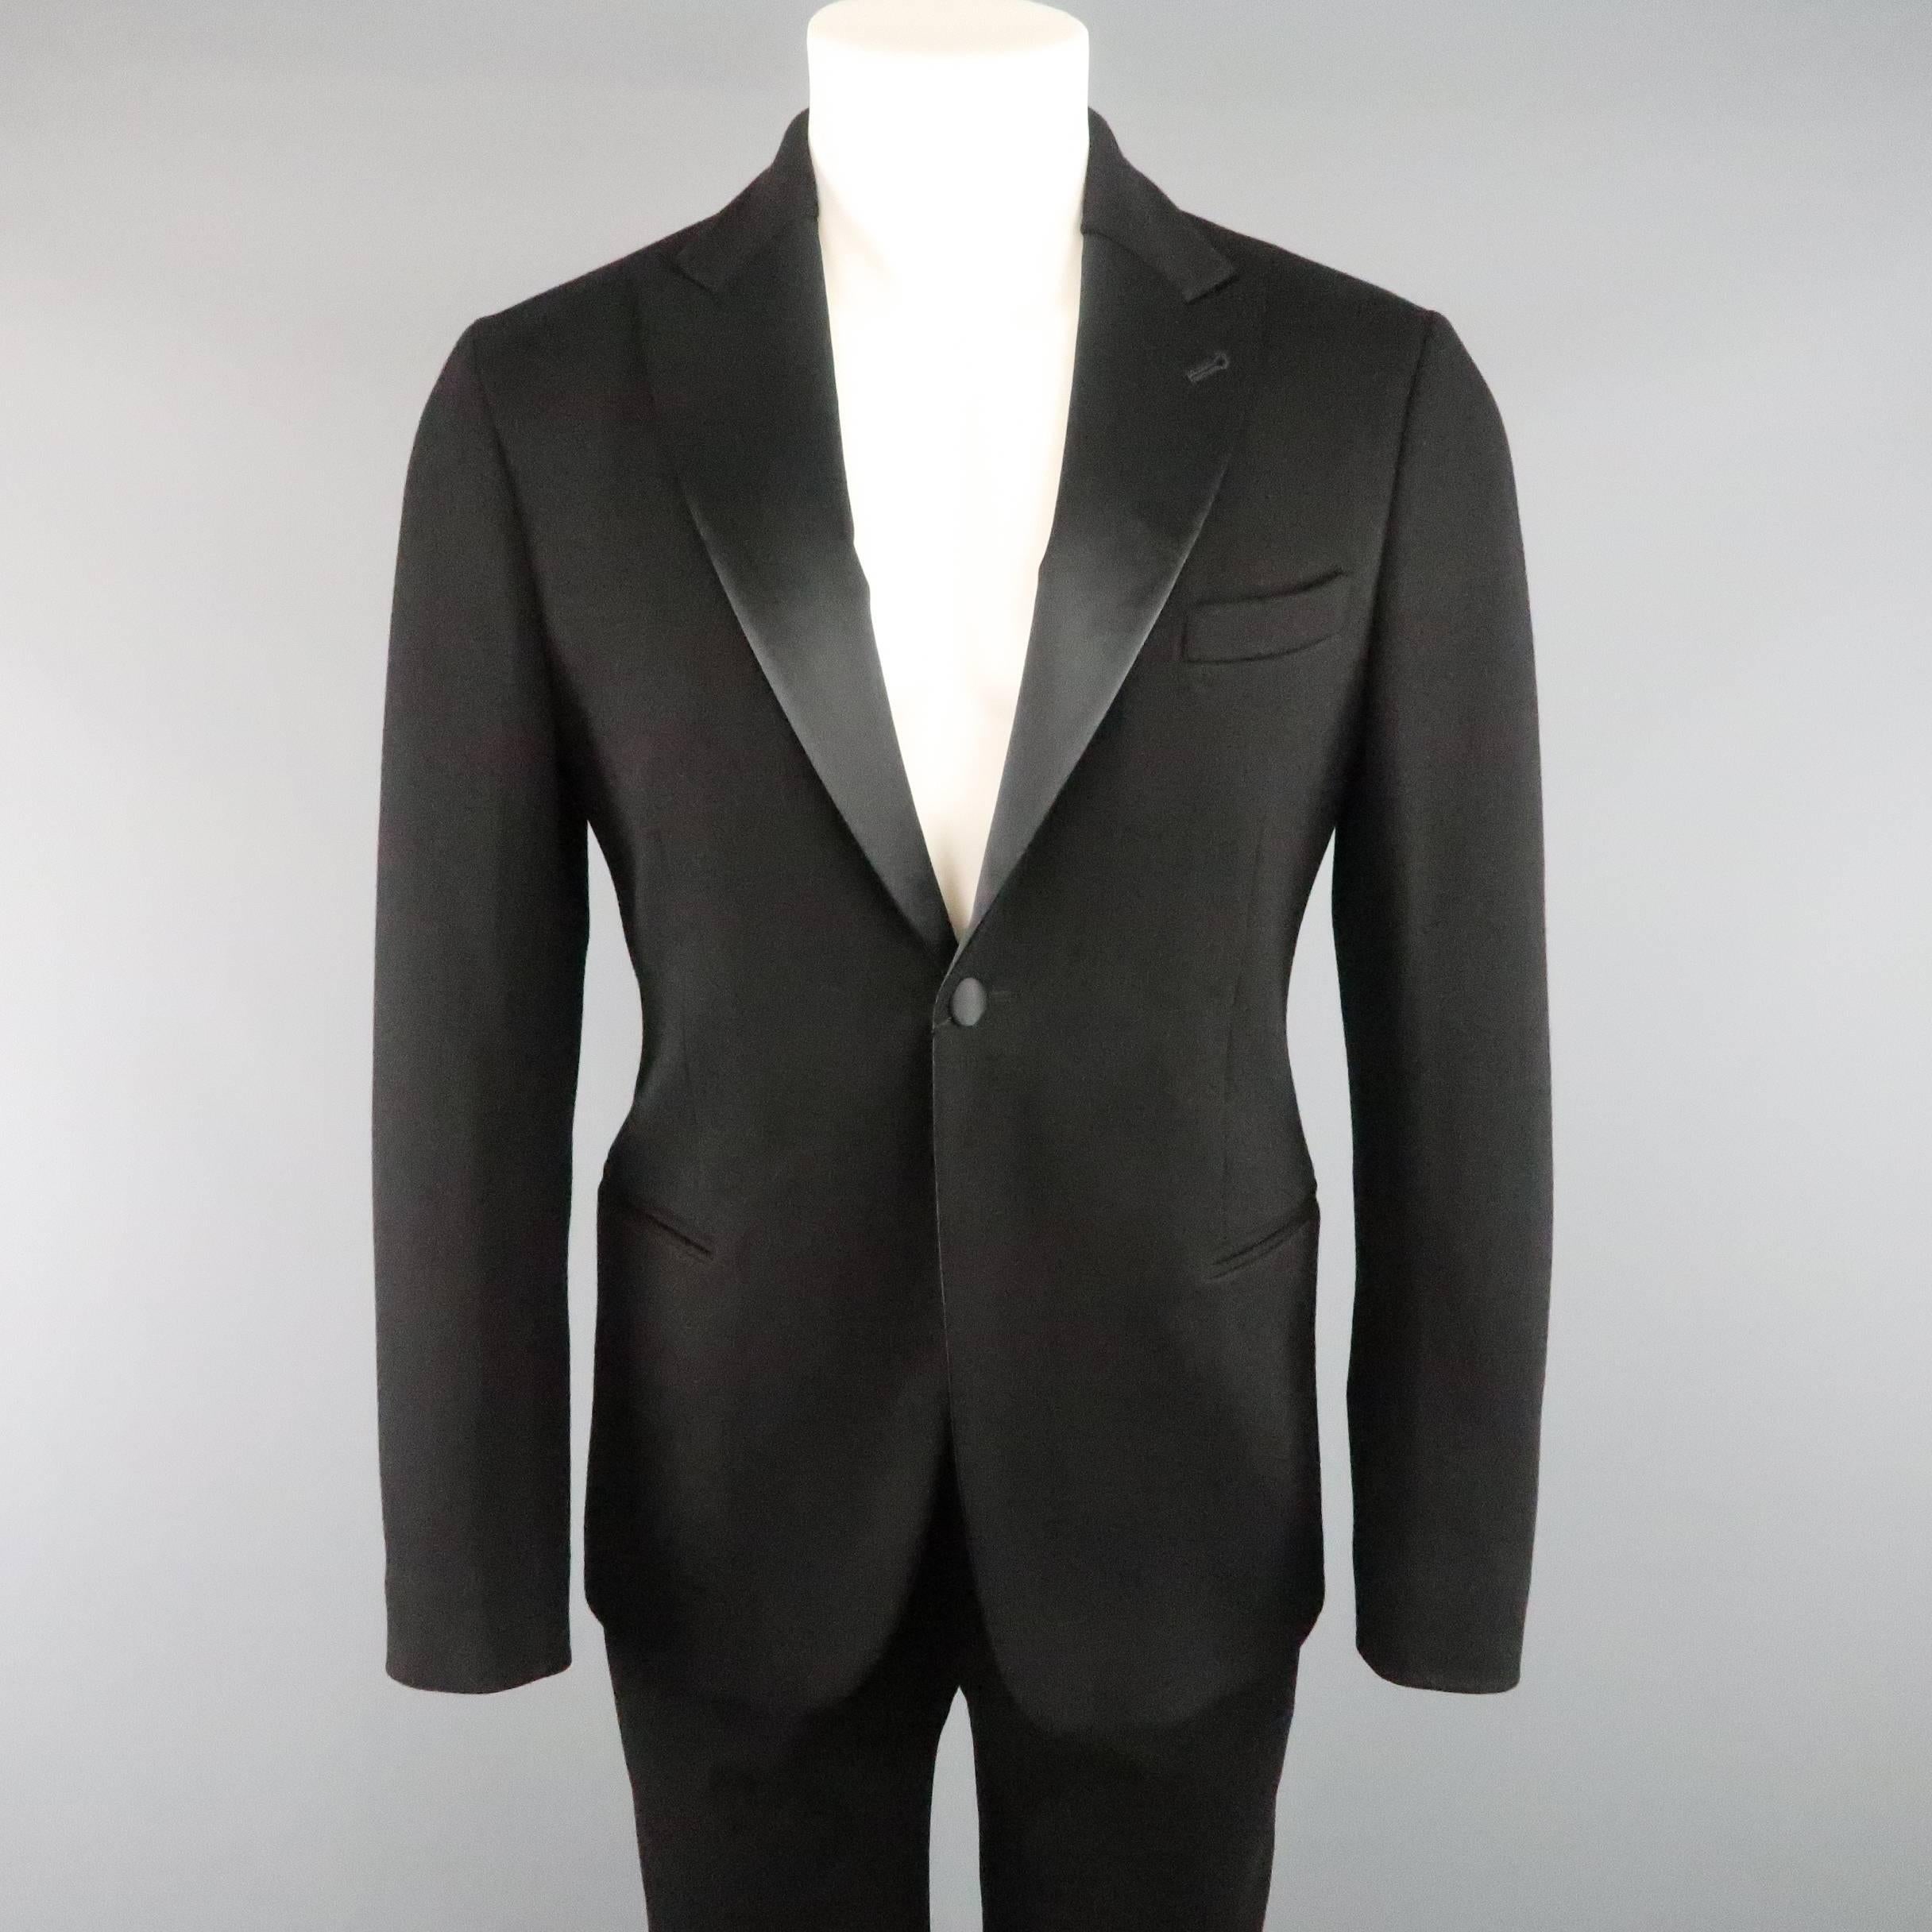 GIORGIO ARMANI tuxedo comes in a soft jersey material and includes a classic single button, satin lined, peak lapel jacket with faux slit pockets and matching satin stripe tuxedo pants. Made in Italy.
 
Retails: $3,195.00
New with Tags.
Marked: IT